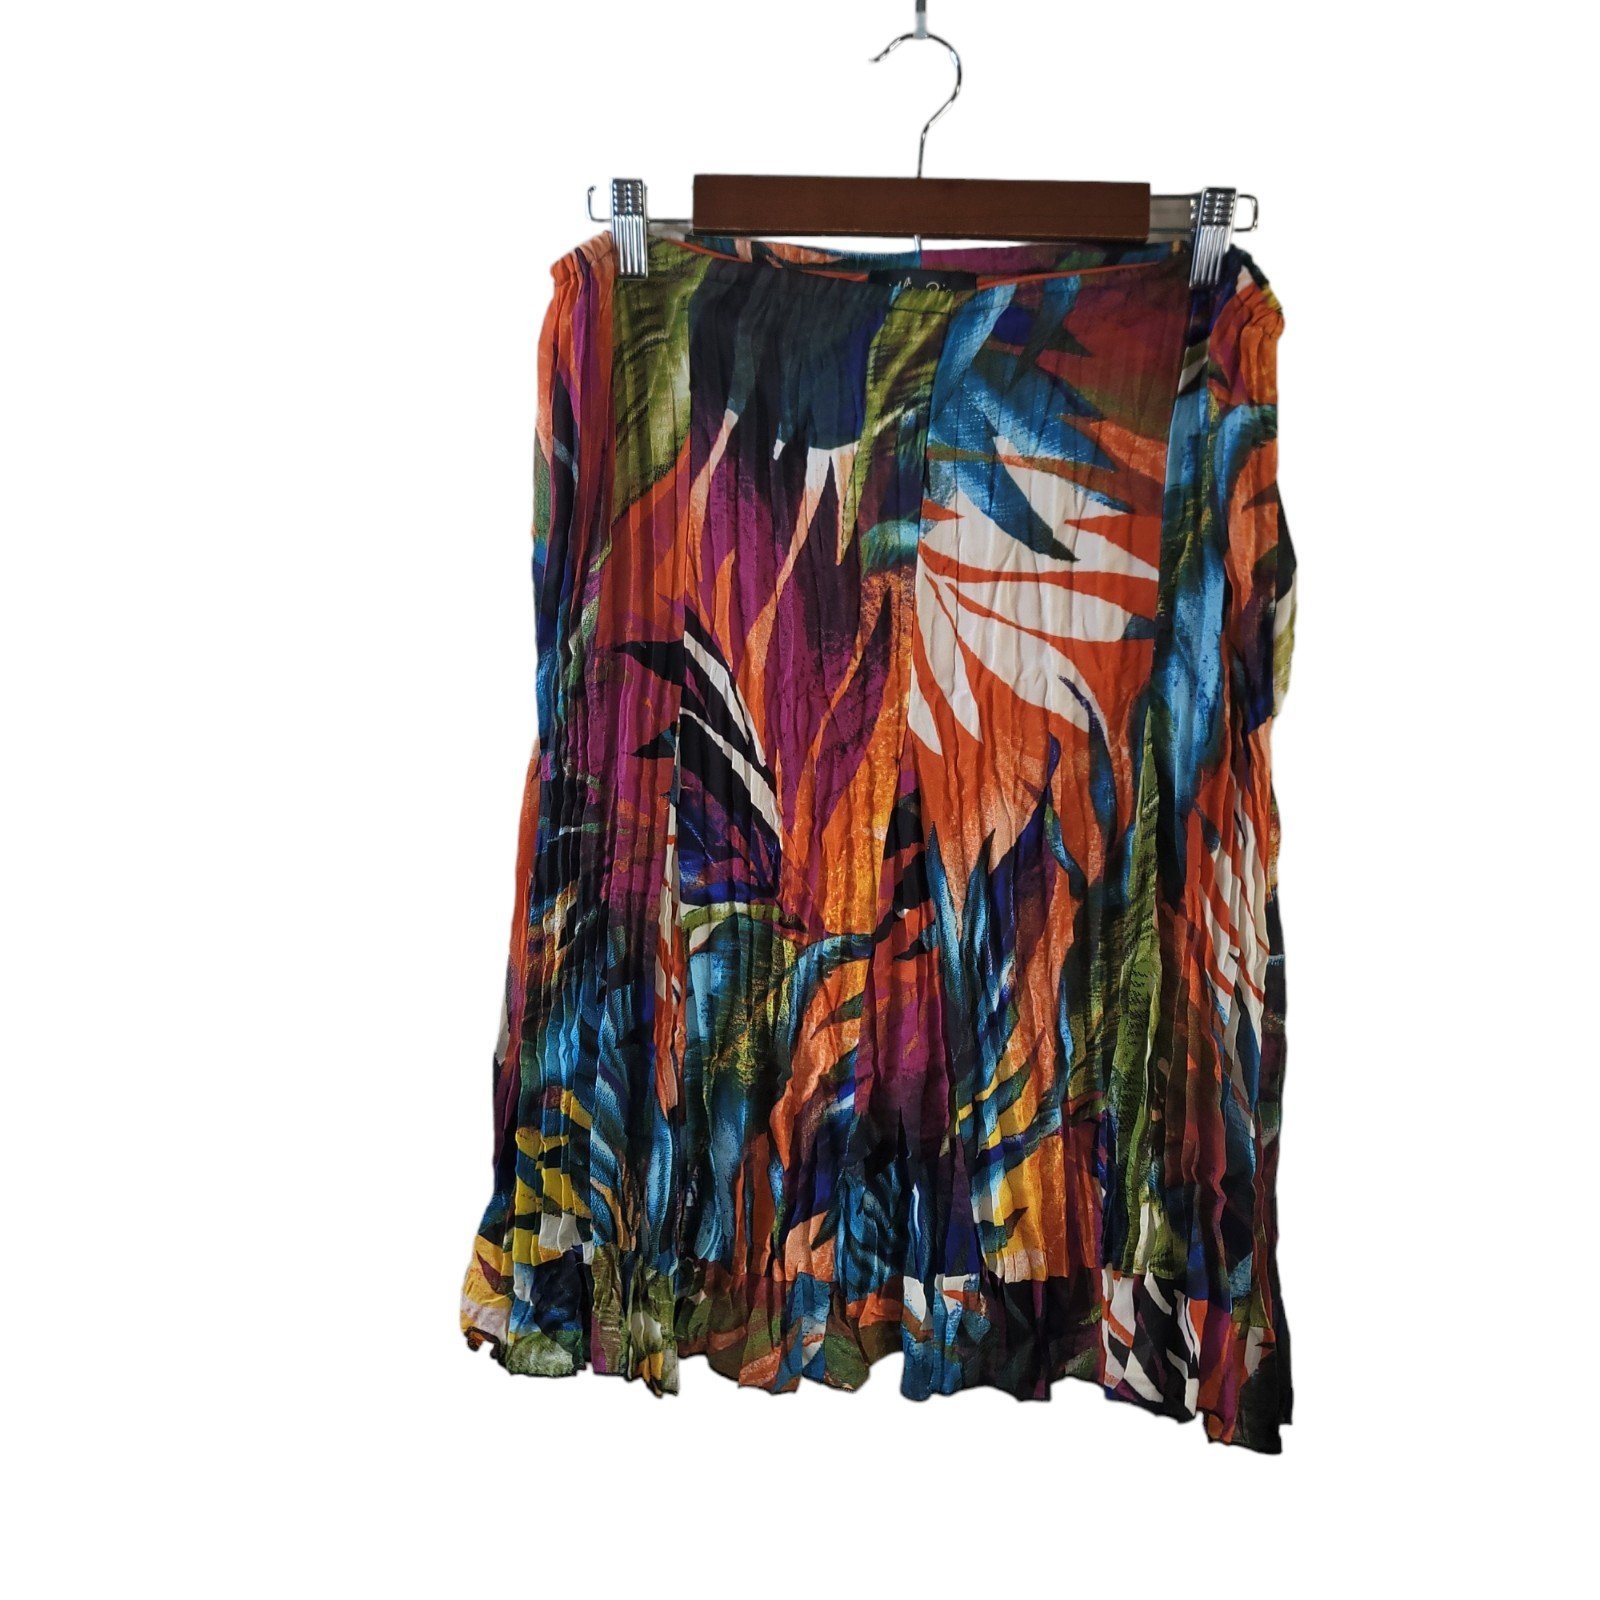 Factory Direct  Melissa Paige Colorful Tropical Crinkled Skirt MpmbvzuQ5 just buy it